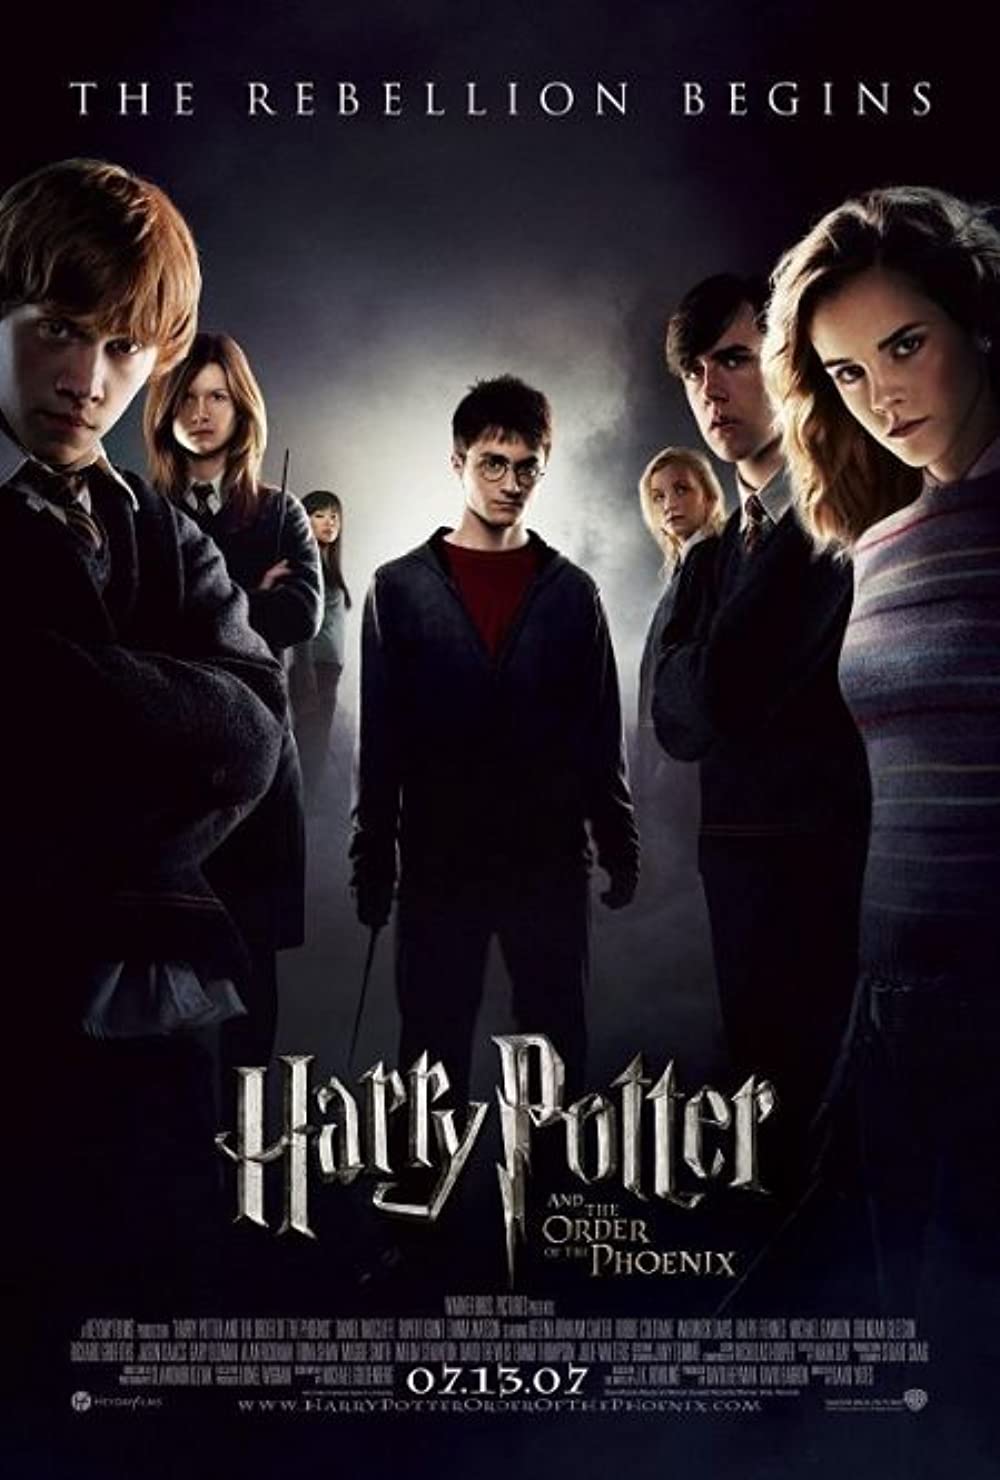 HARRY POTTER AND THE ORDER OF THE PHOENIX (RE-RELEASE)